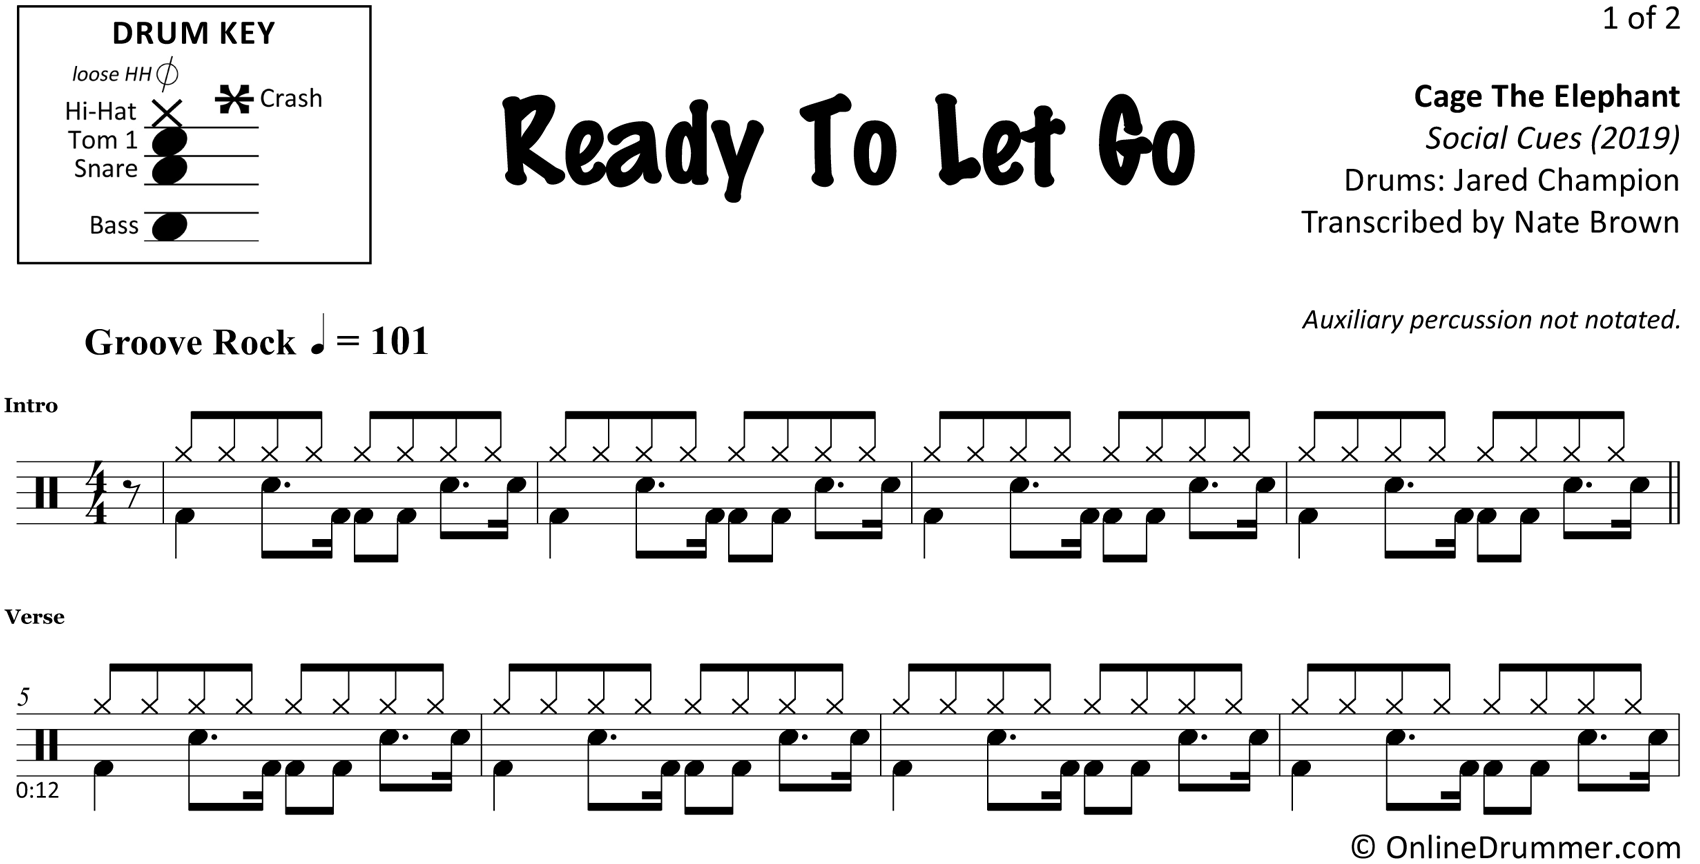 Ready To Let Go - Cage The Elephant - Drum Sheet Music